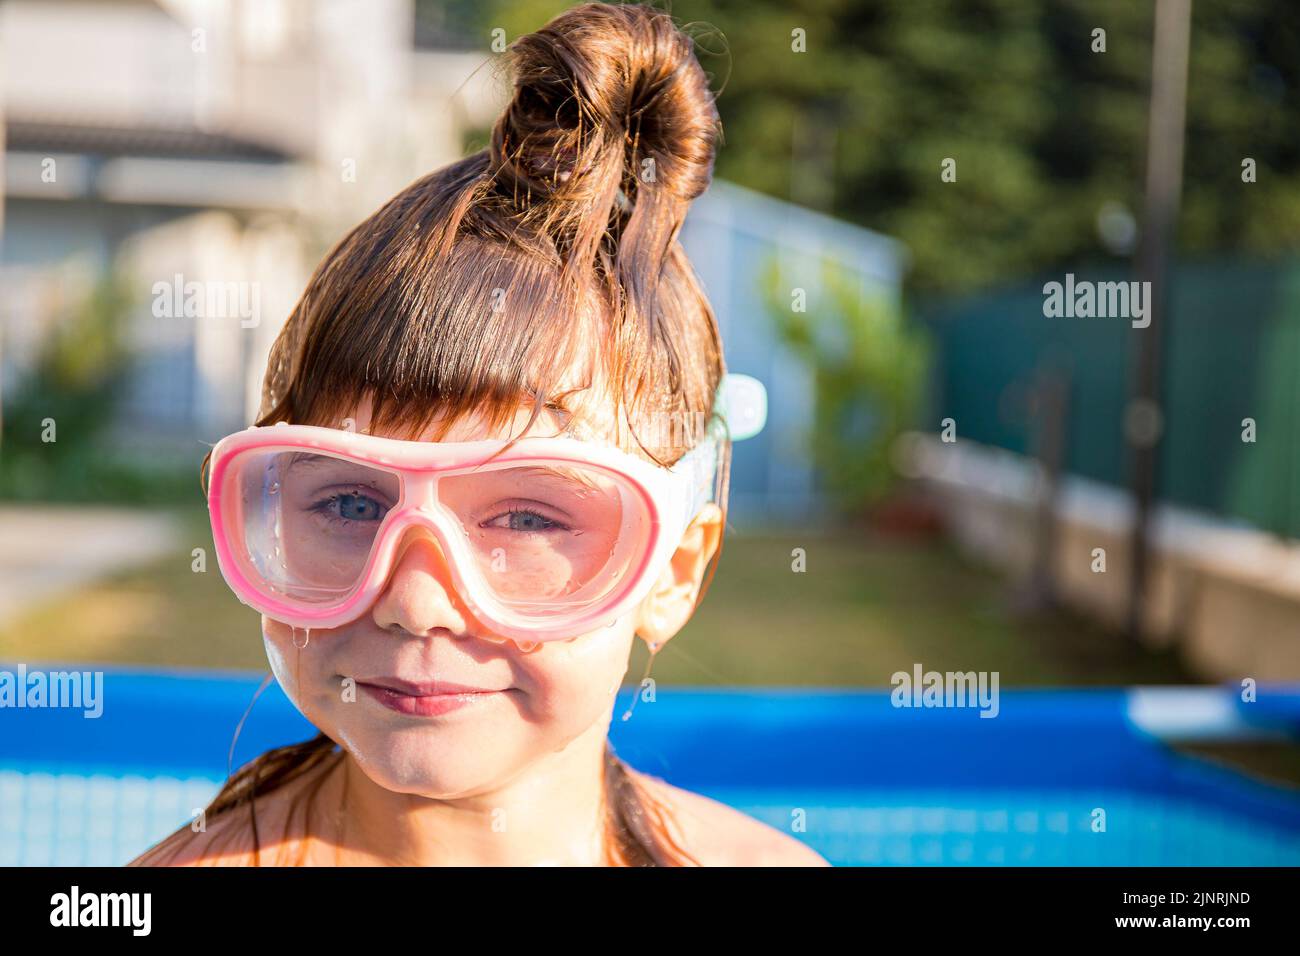 Caucasian child girl with hair bun and funny expression wearing swimming goggles in home pool. Outdoor portrait. Stock Photo